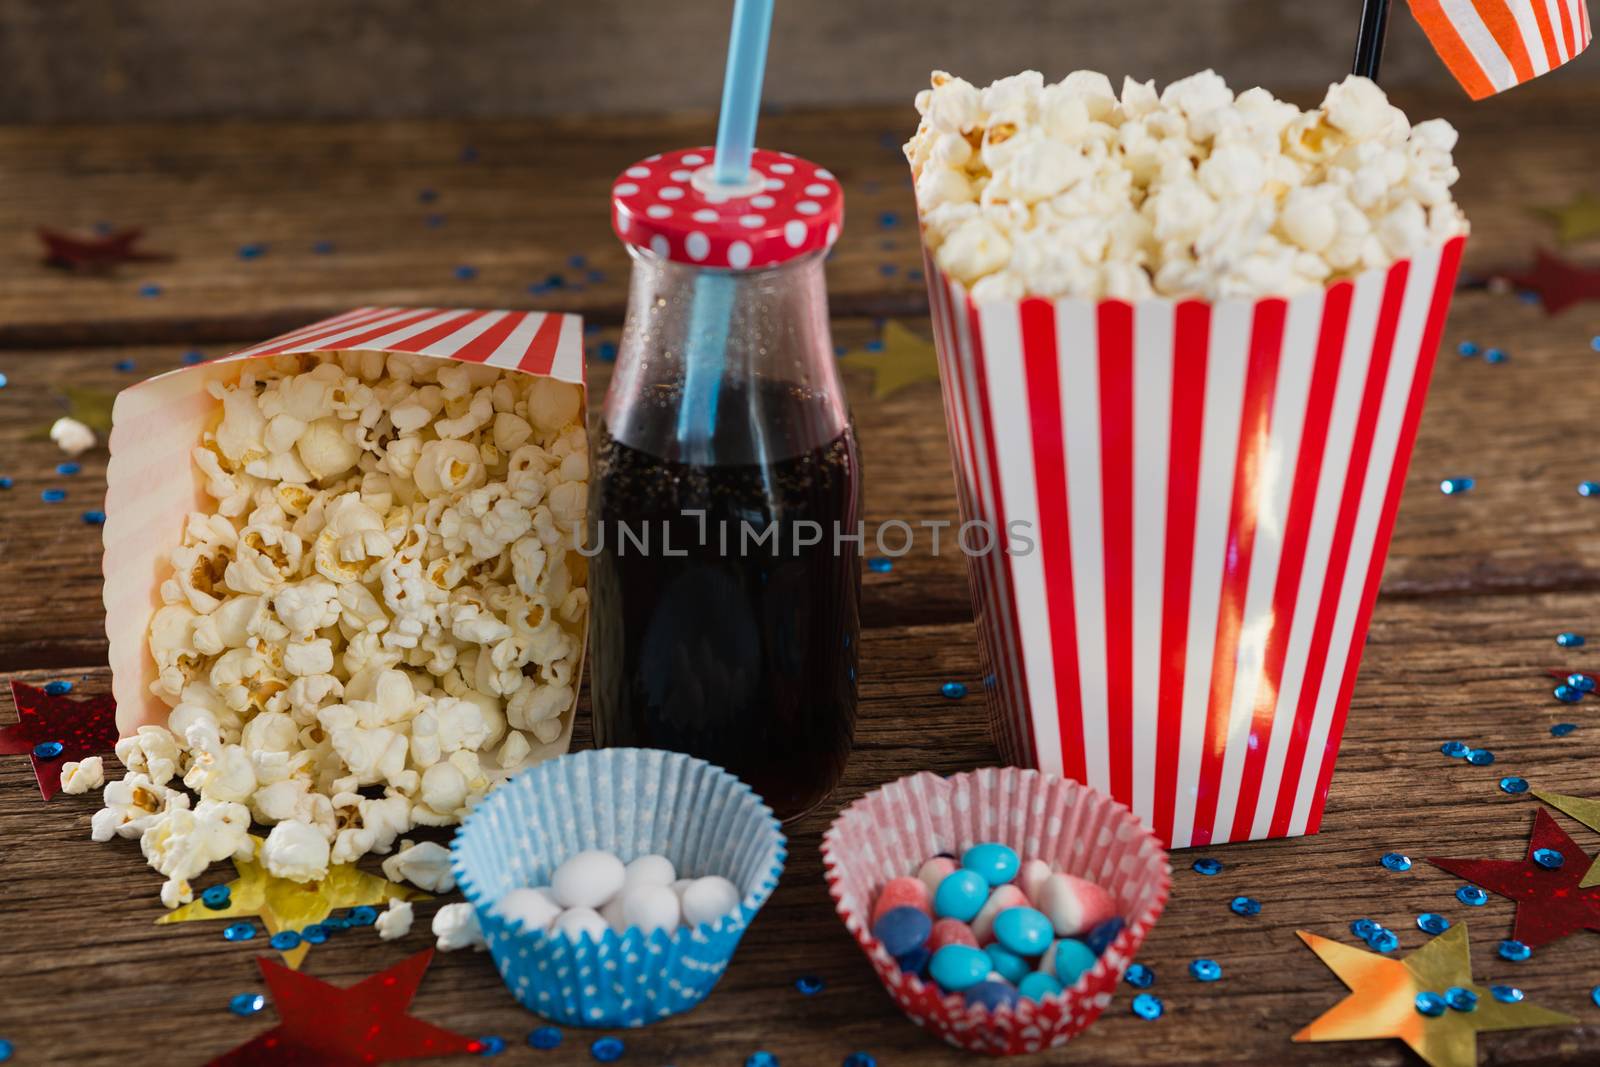 Popcorn, sweet food and cold drink decorated with 4th july theme by Wavebreakmedia